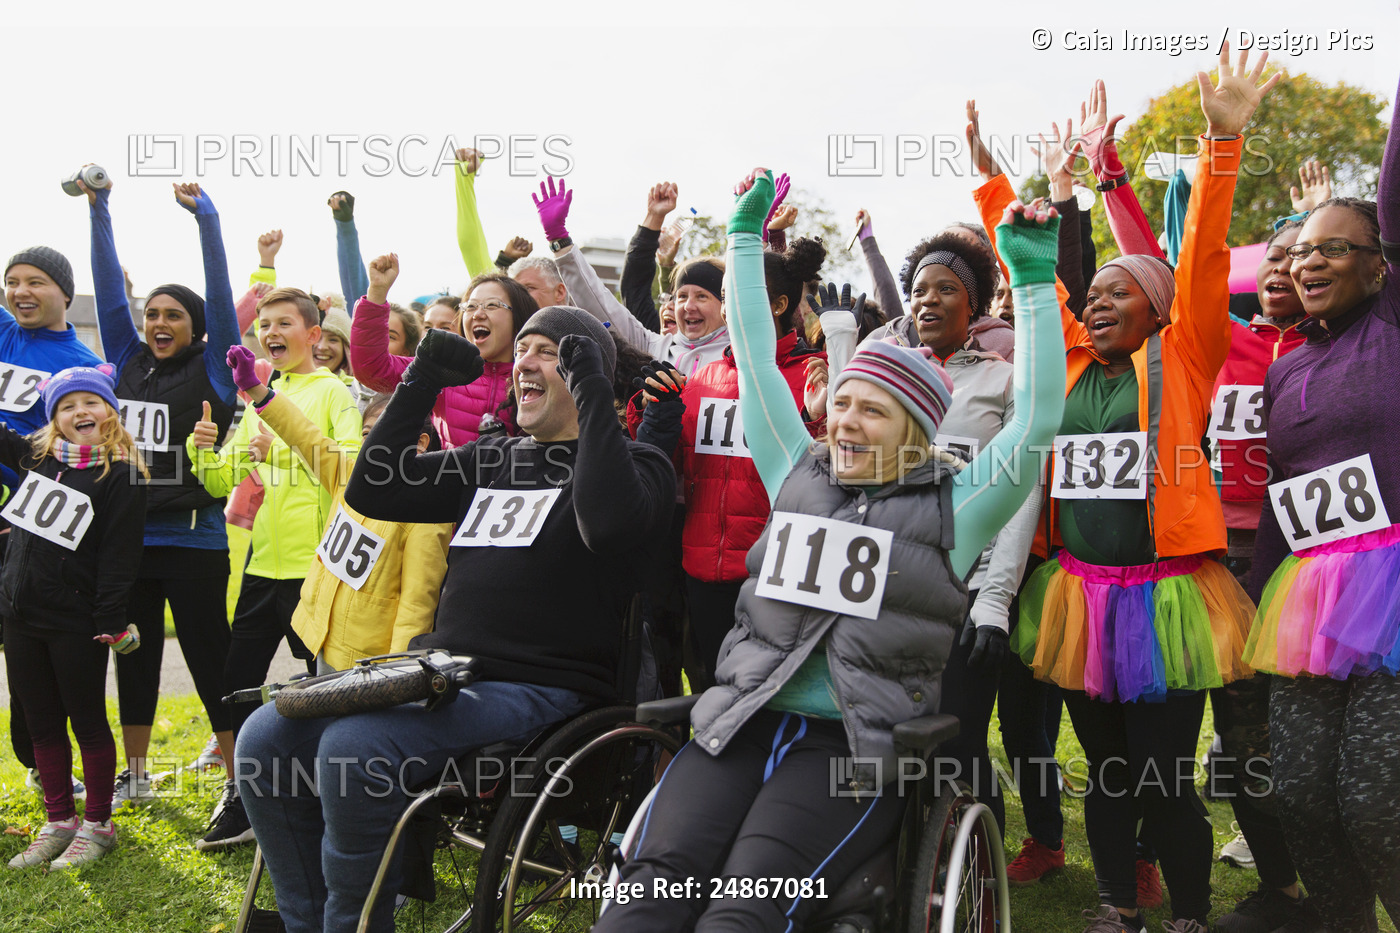 Enthusiastic crowd cheering at charity race in park